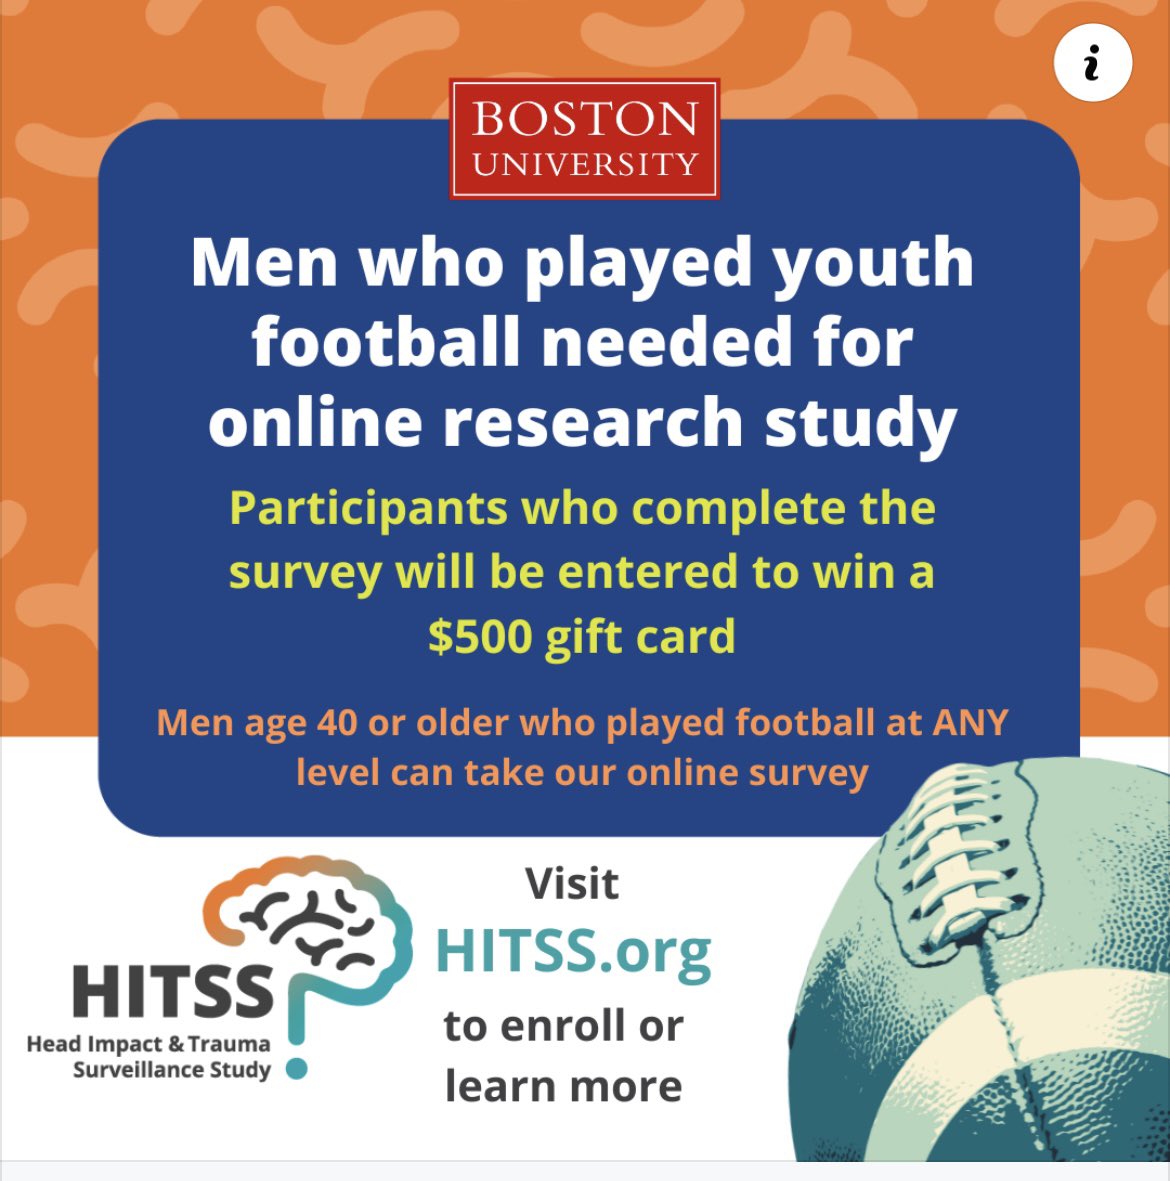 Did you play Pop Warner or pee-wee football? We are urgently looking for men 40+ who played youth 🏈 but not in high school, to take an online survey so that we can learn more about later-life brain health risks from head impacts in contact sports. Enroll HITSS.org